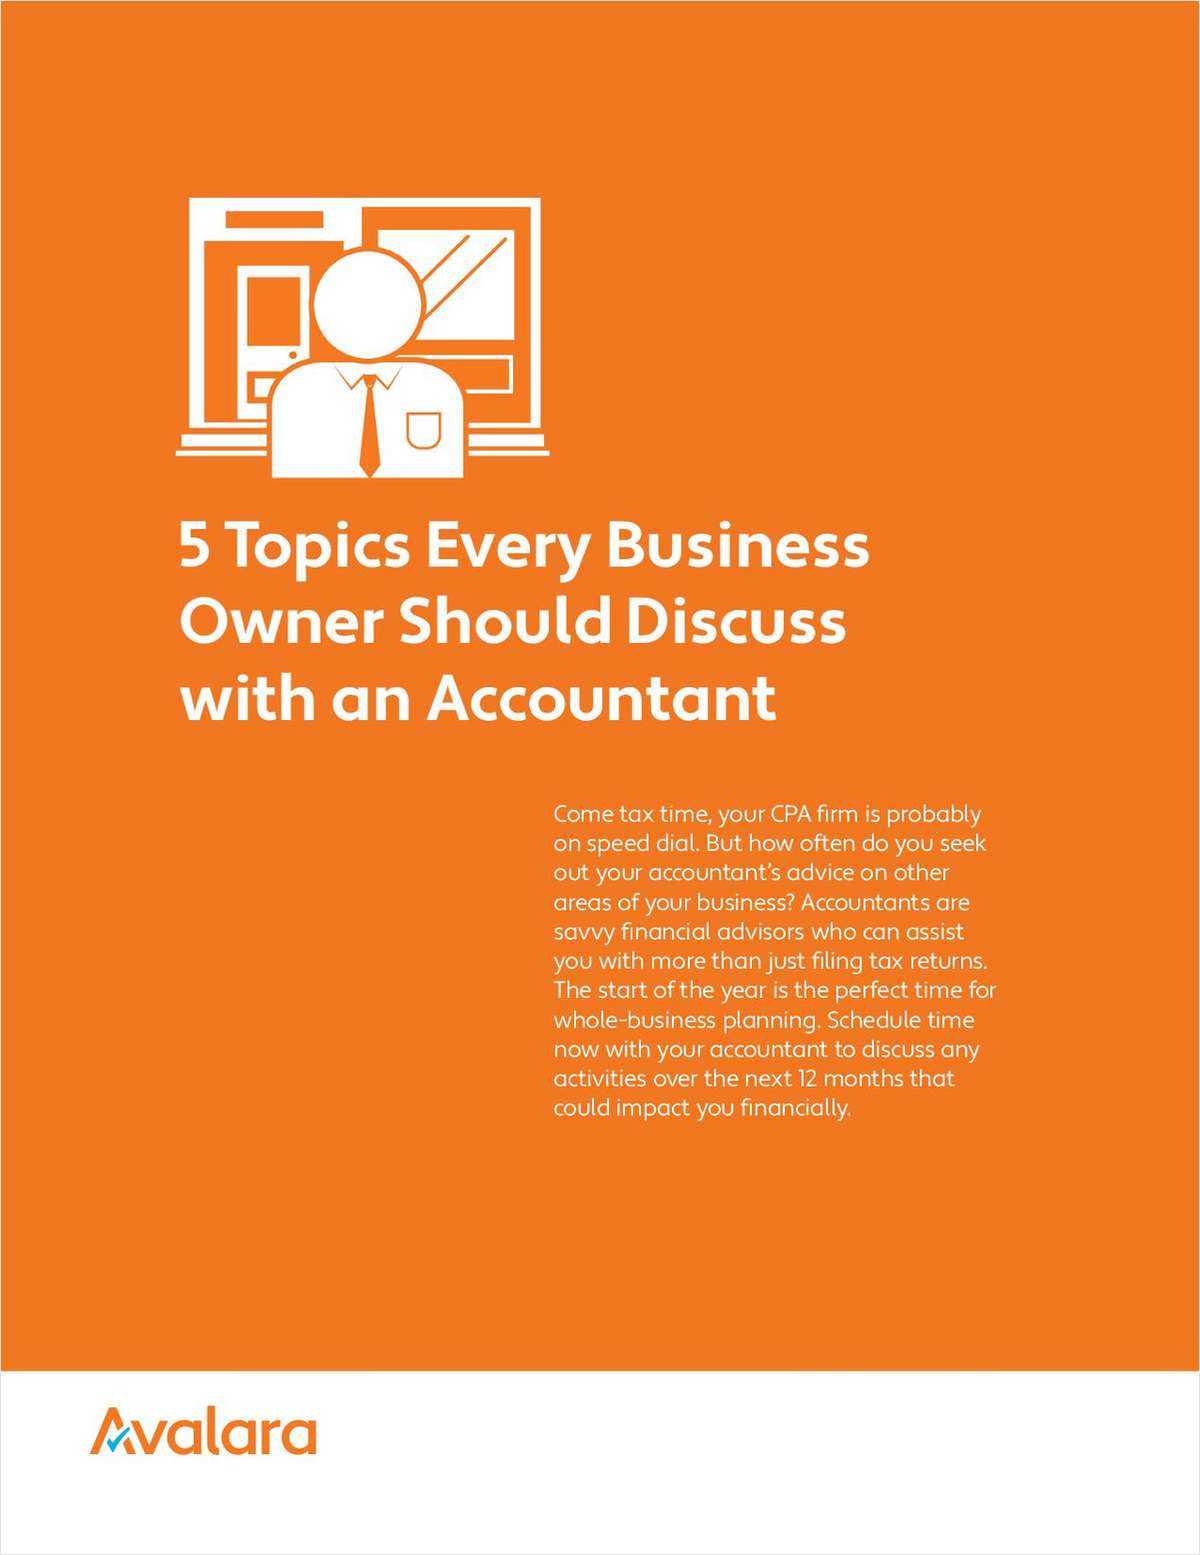 5 Topics Every Business Owner Should Discuss with an Accountant